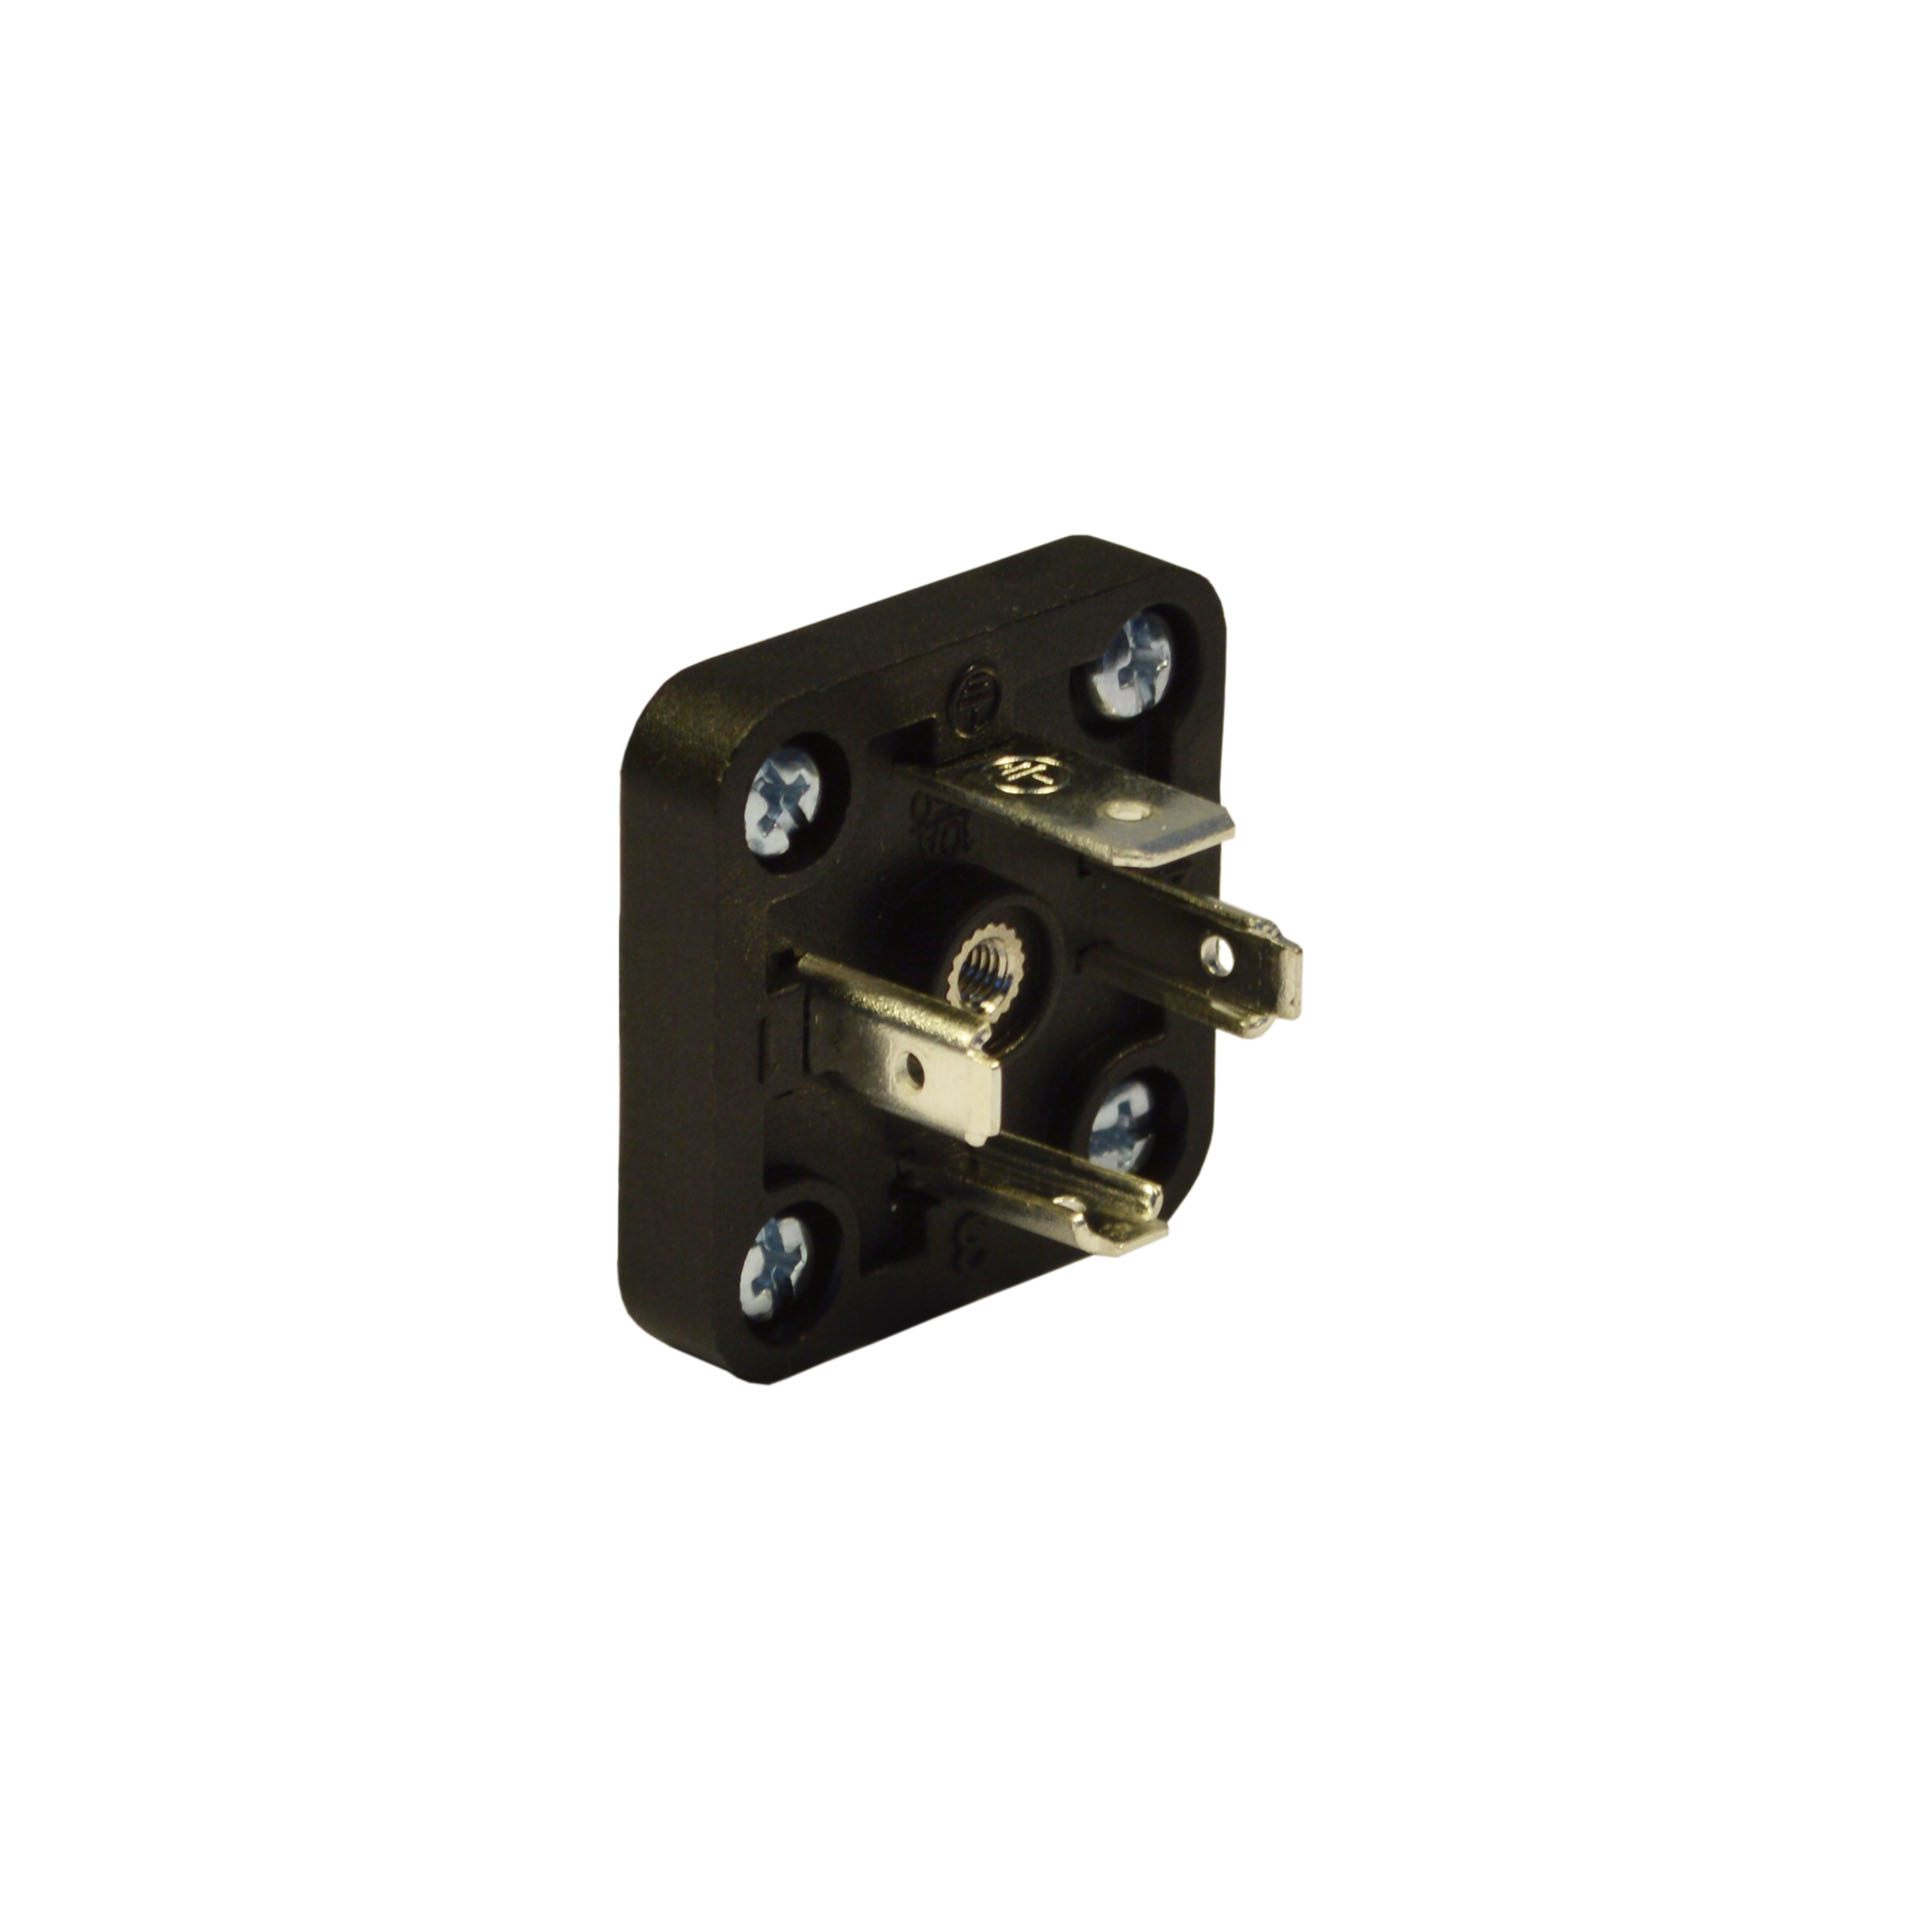 Square base A-type 3p+t,black,central nut closed,PA66 V0,4fixing holes, with flat back side.